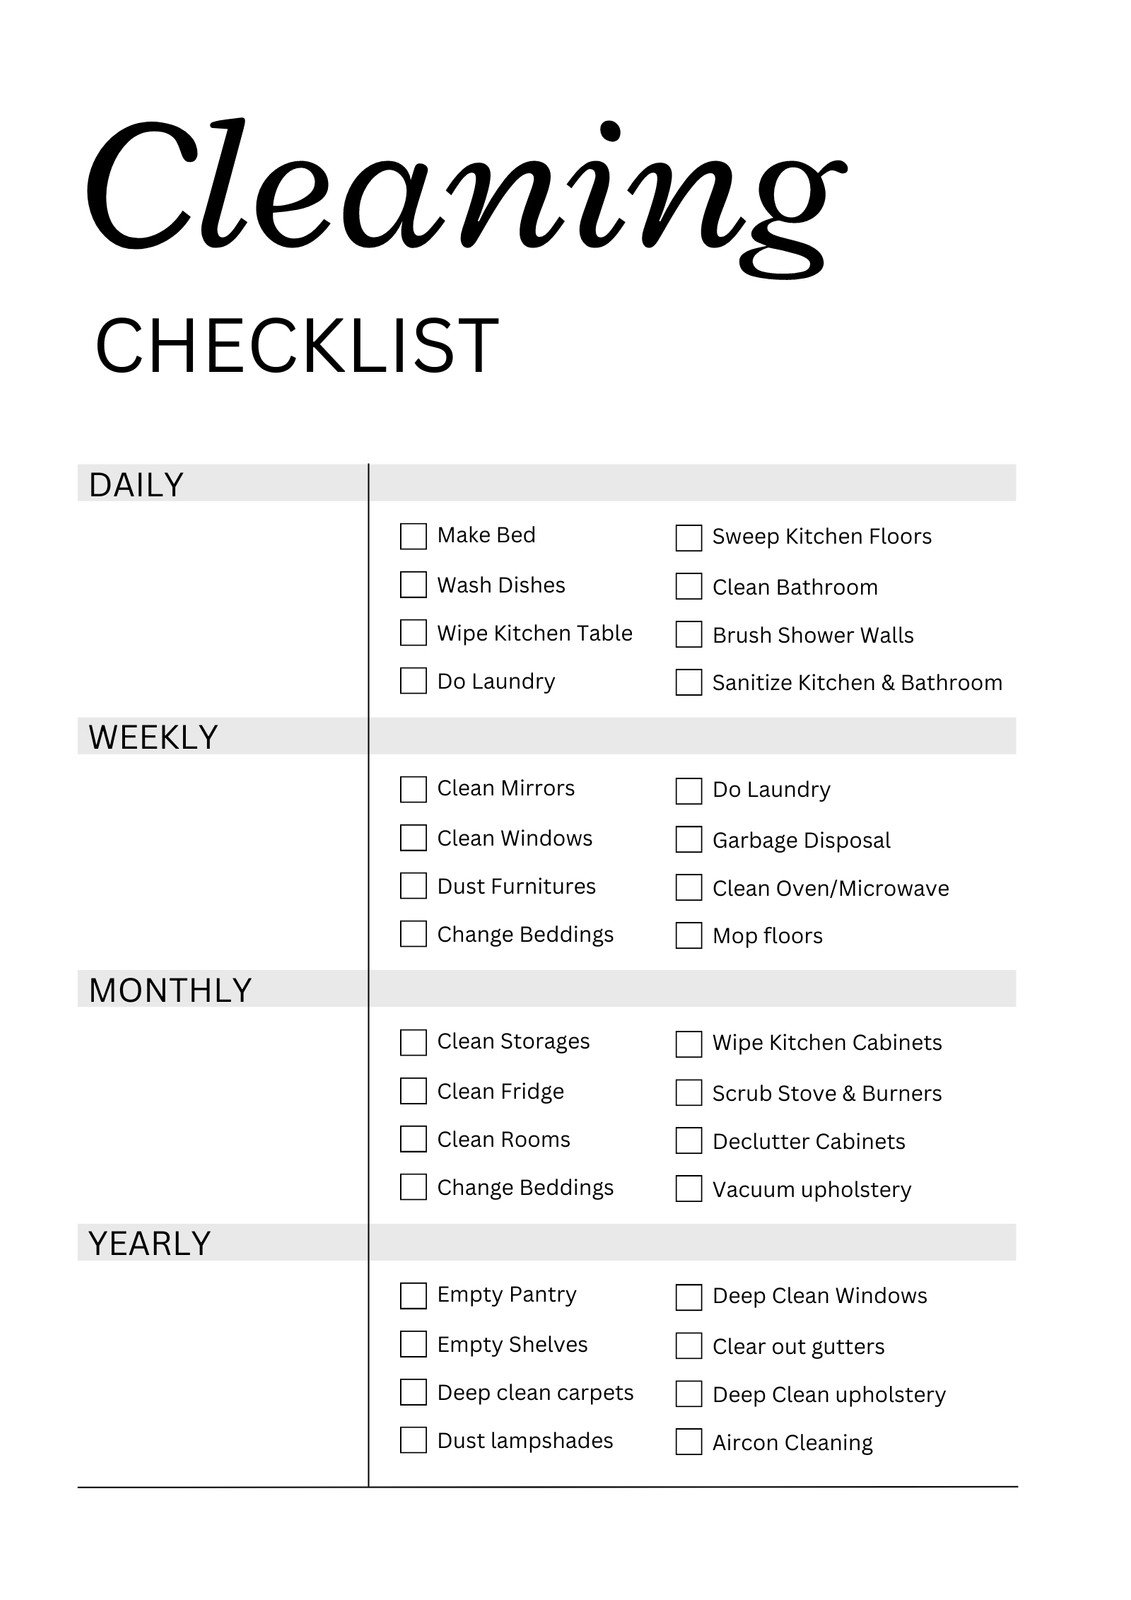 office-cleaning-checklist-printable-23590-the-best-porn-website